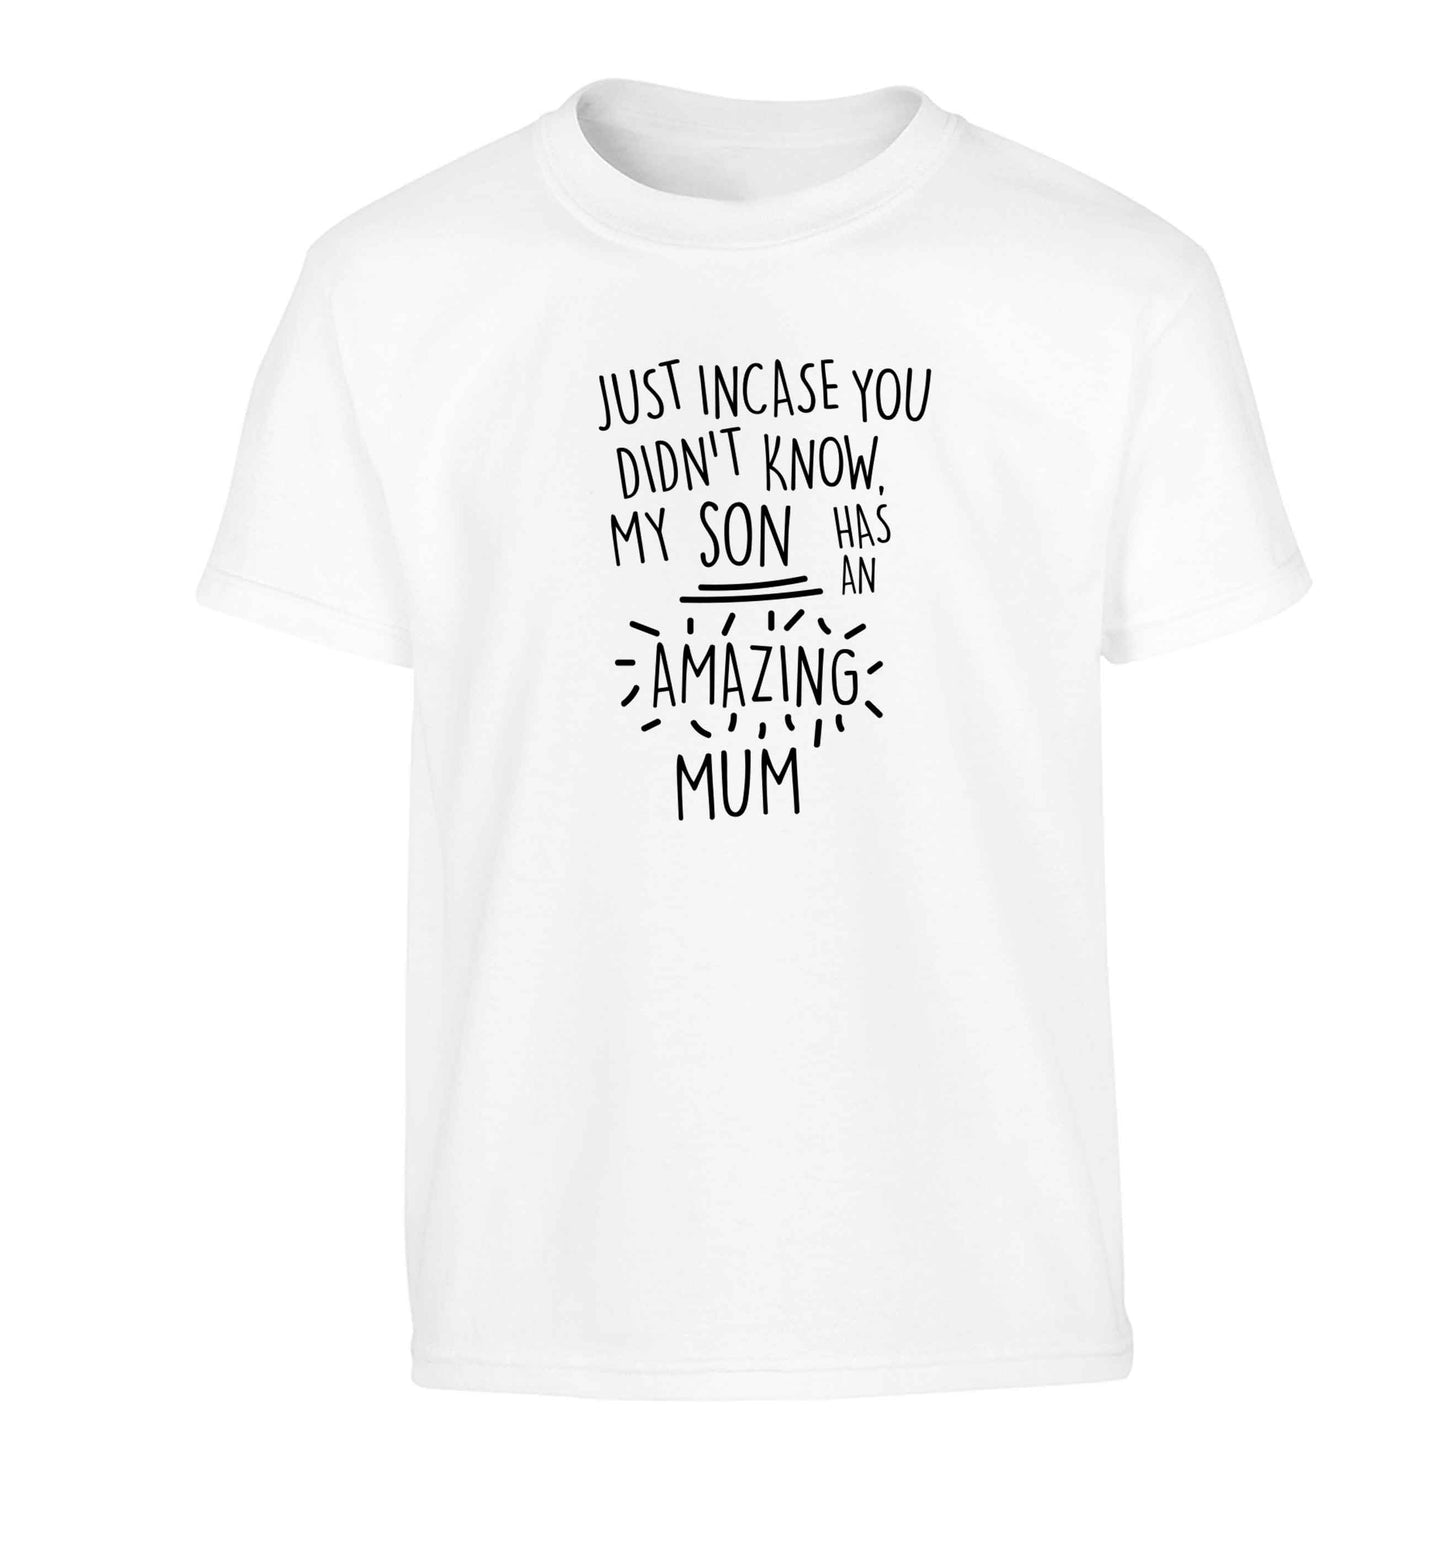 Just incase you didn't know my son has an amazing mum Children's white Tshirt 12-13 Years